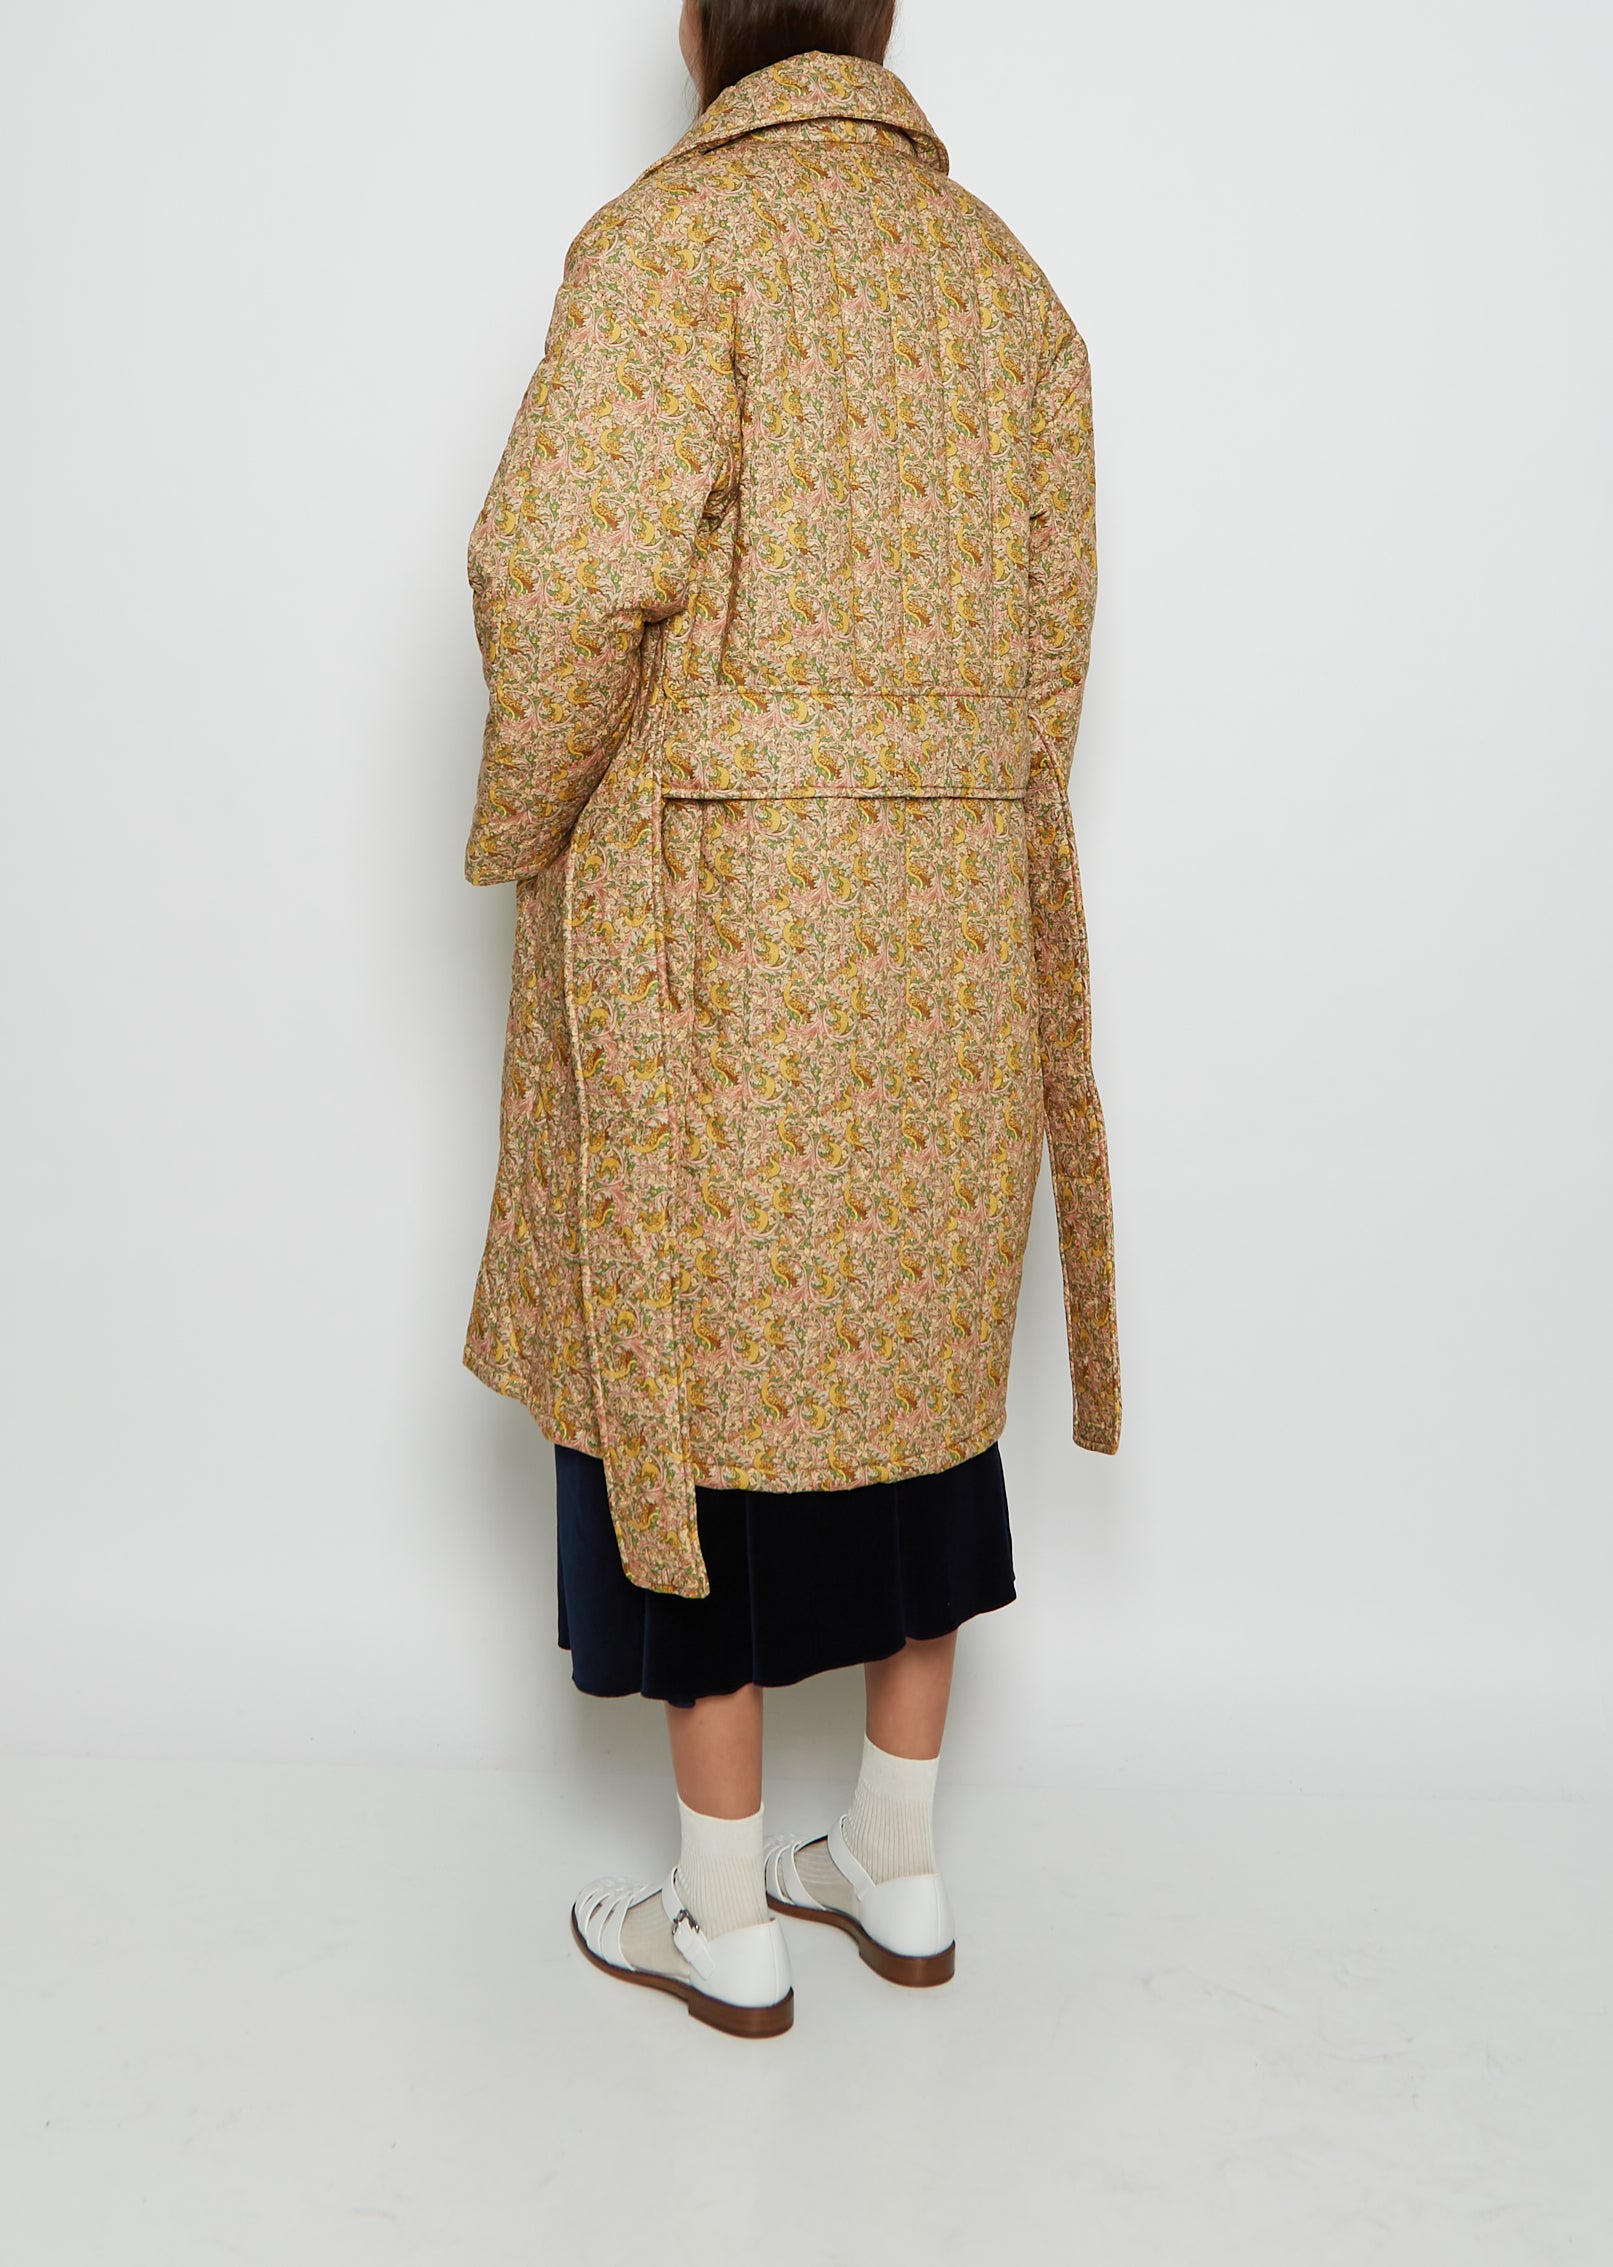 GUCCI-VINTAGE TRENCH 70s Cotton/wool Trench Fashion -  Israel